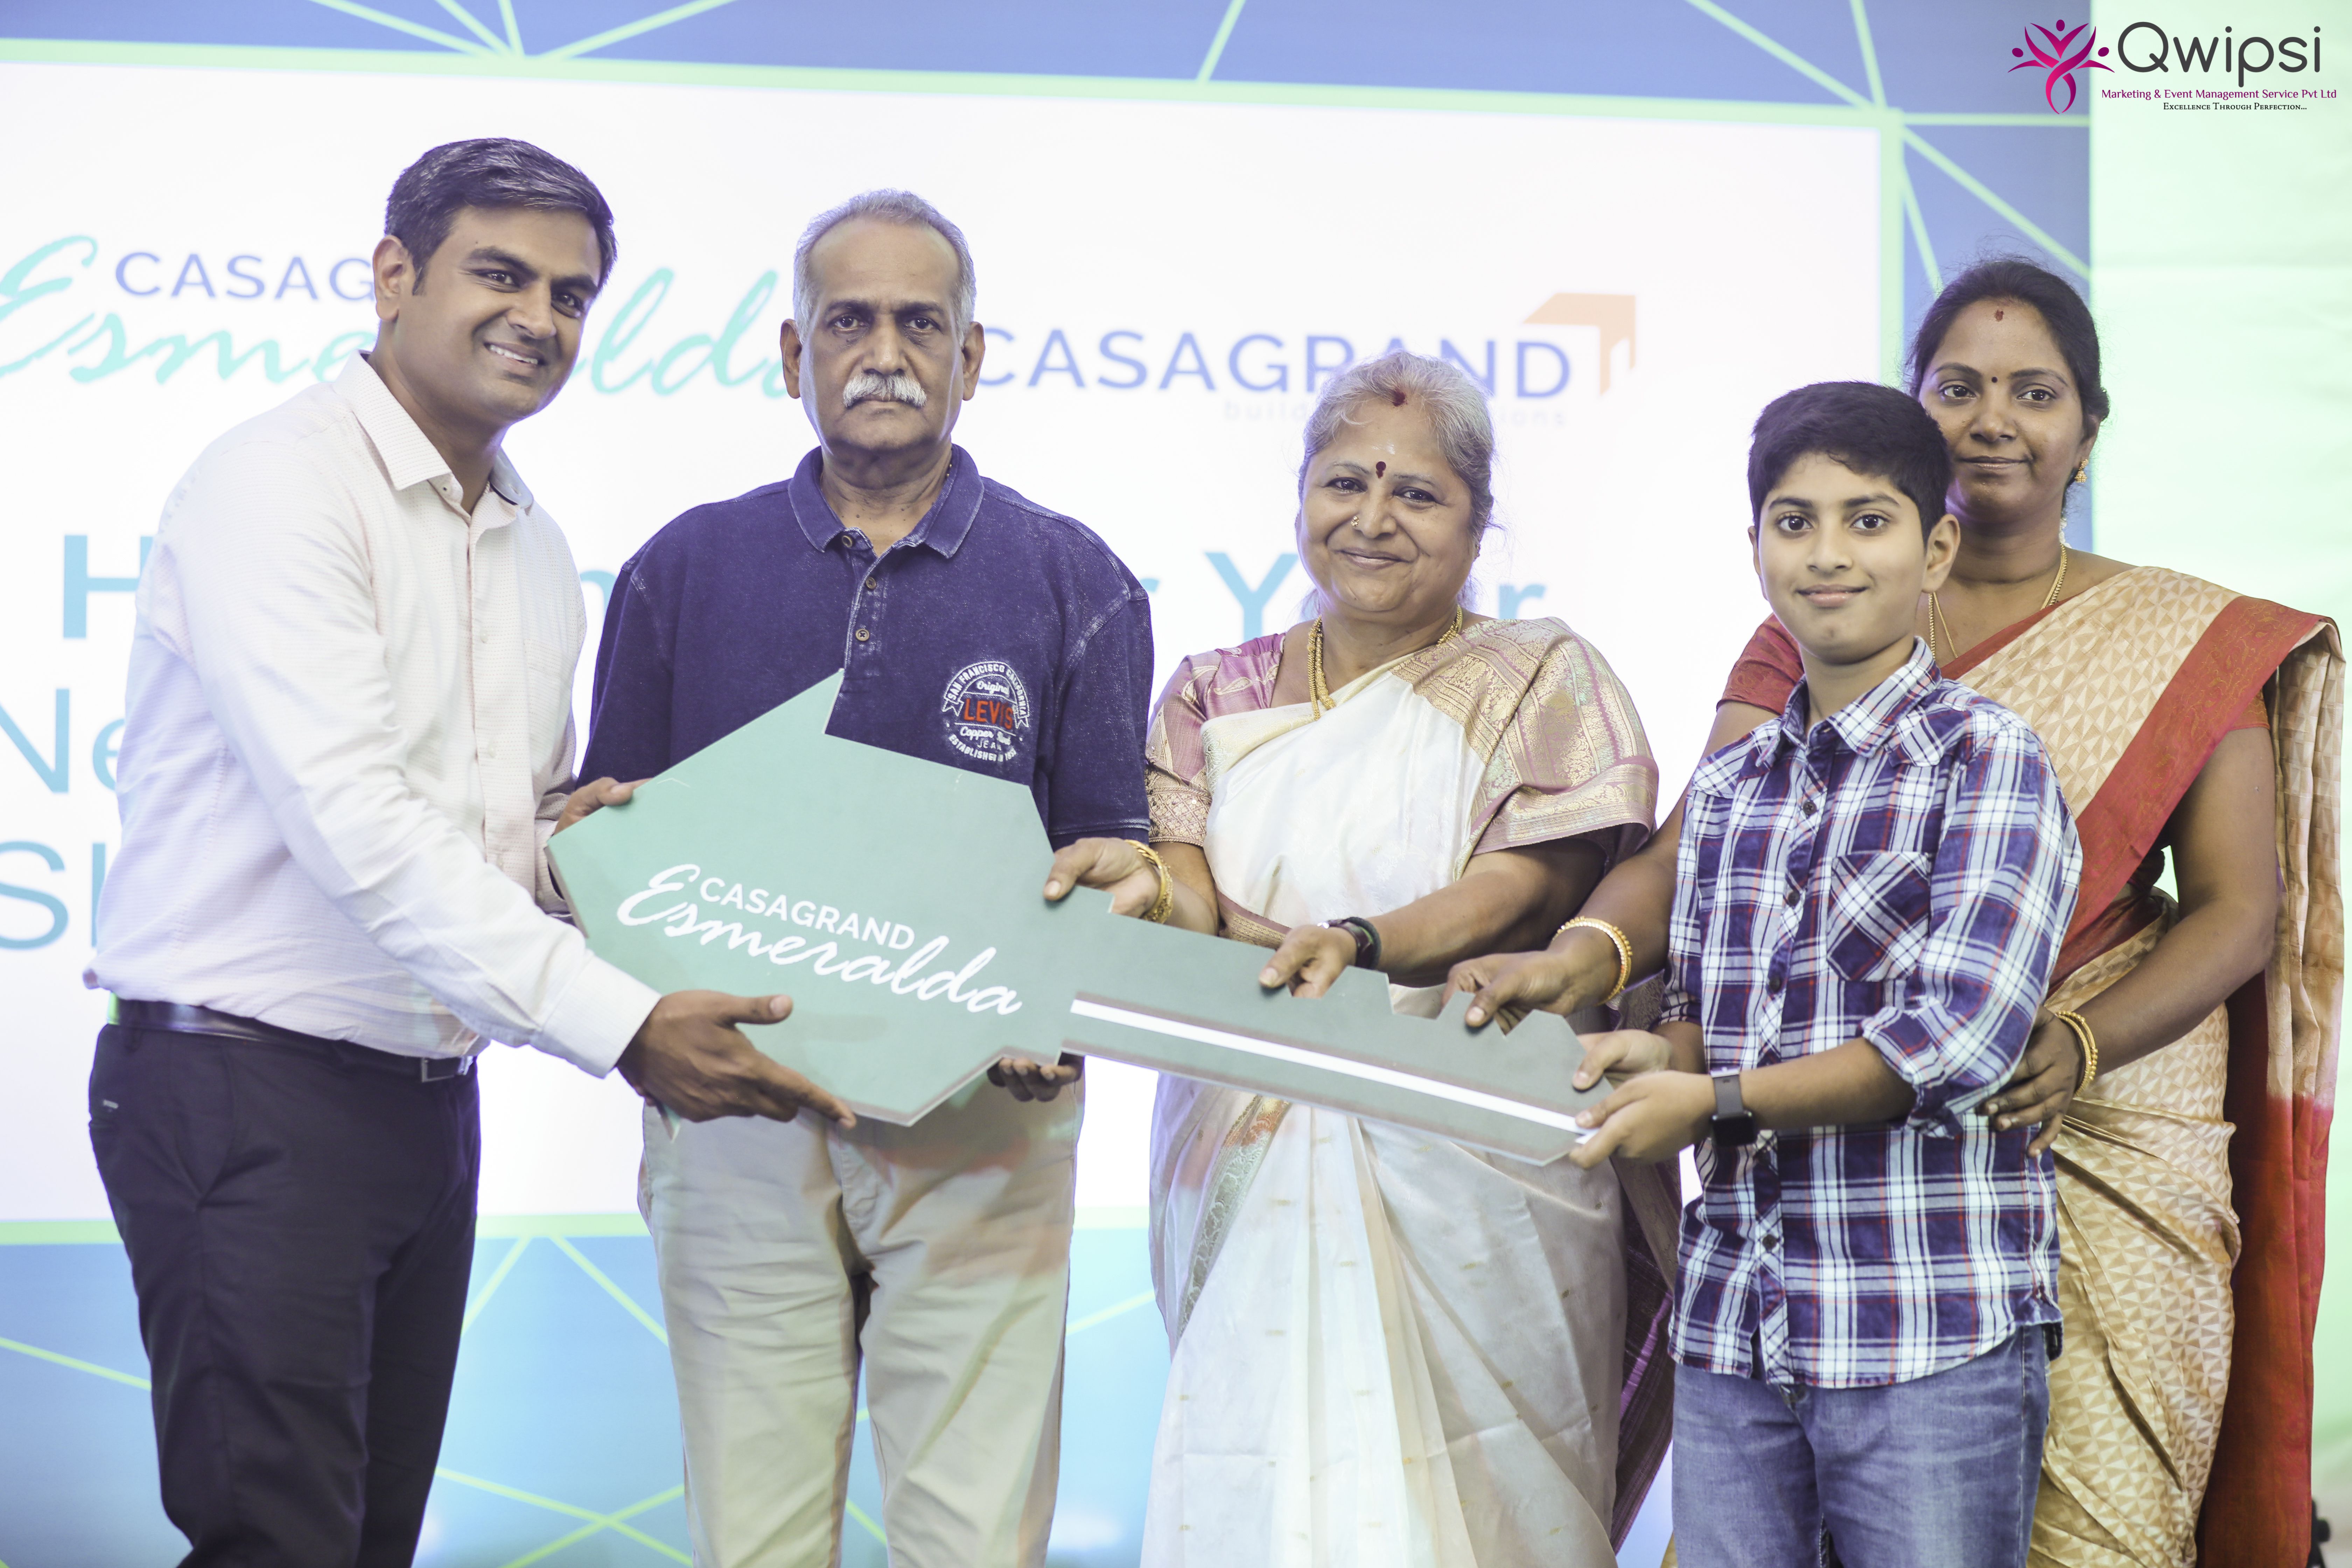 Sathish CG, Director of Bangalore Zone, Casagrand Builder Pvt. Ltd. handing over the key to the homebuyer at the event (2)